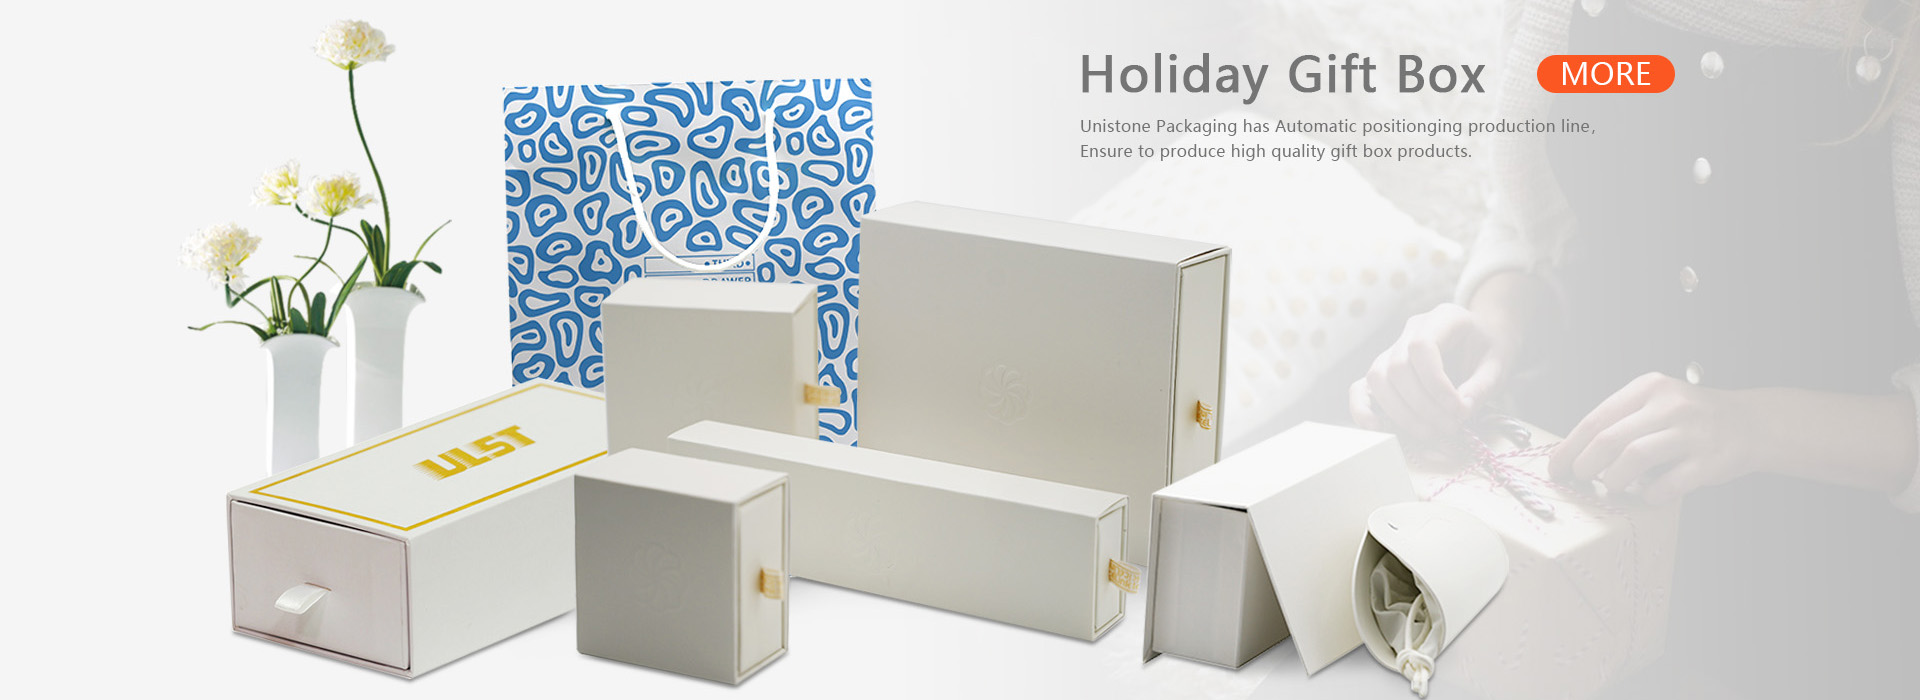 Holiday Gift Box Manufacturers